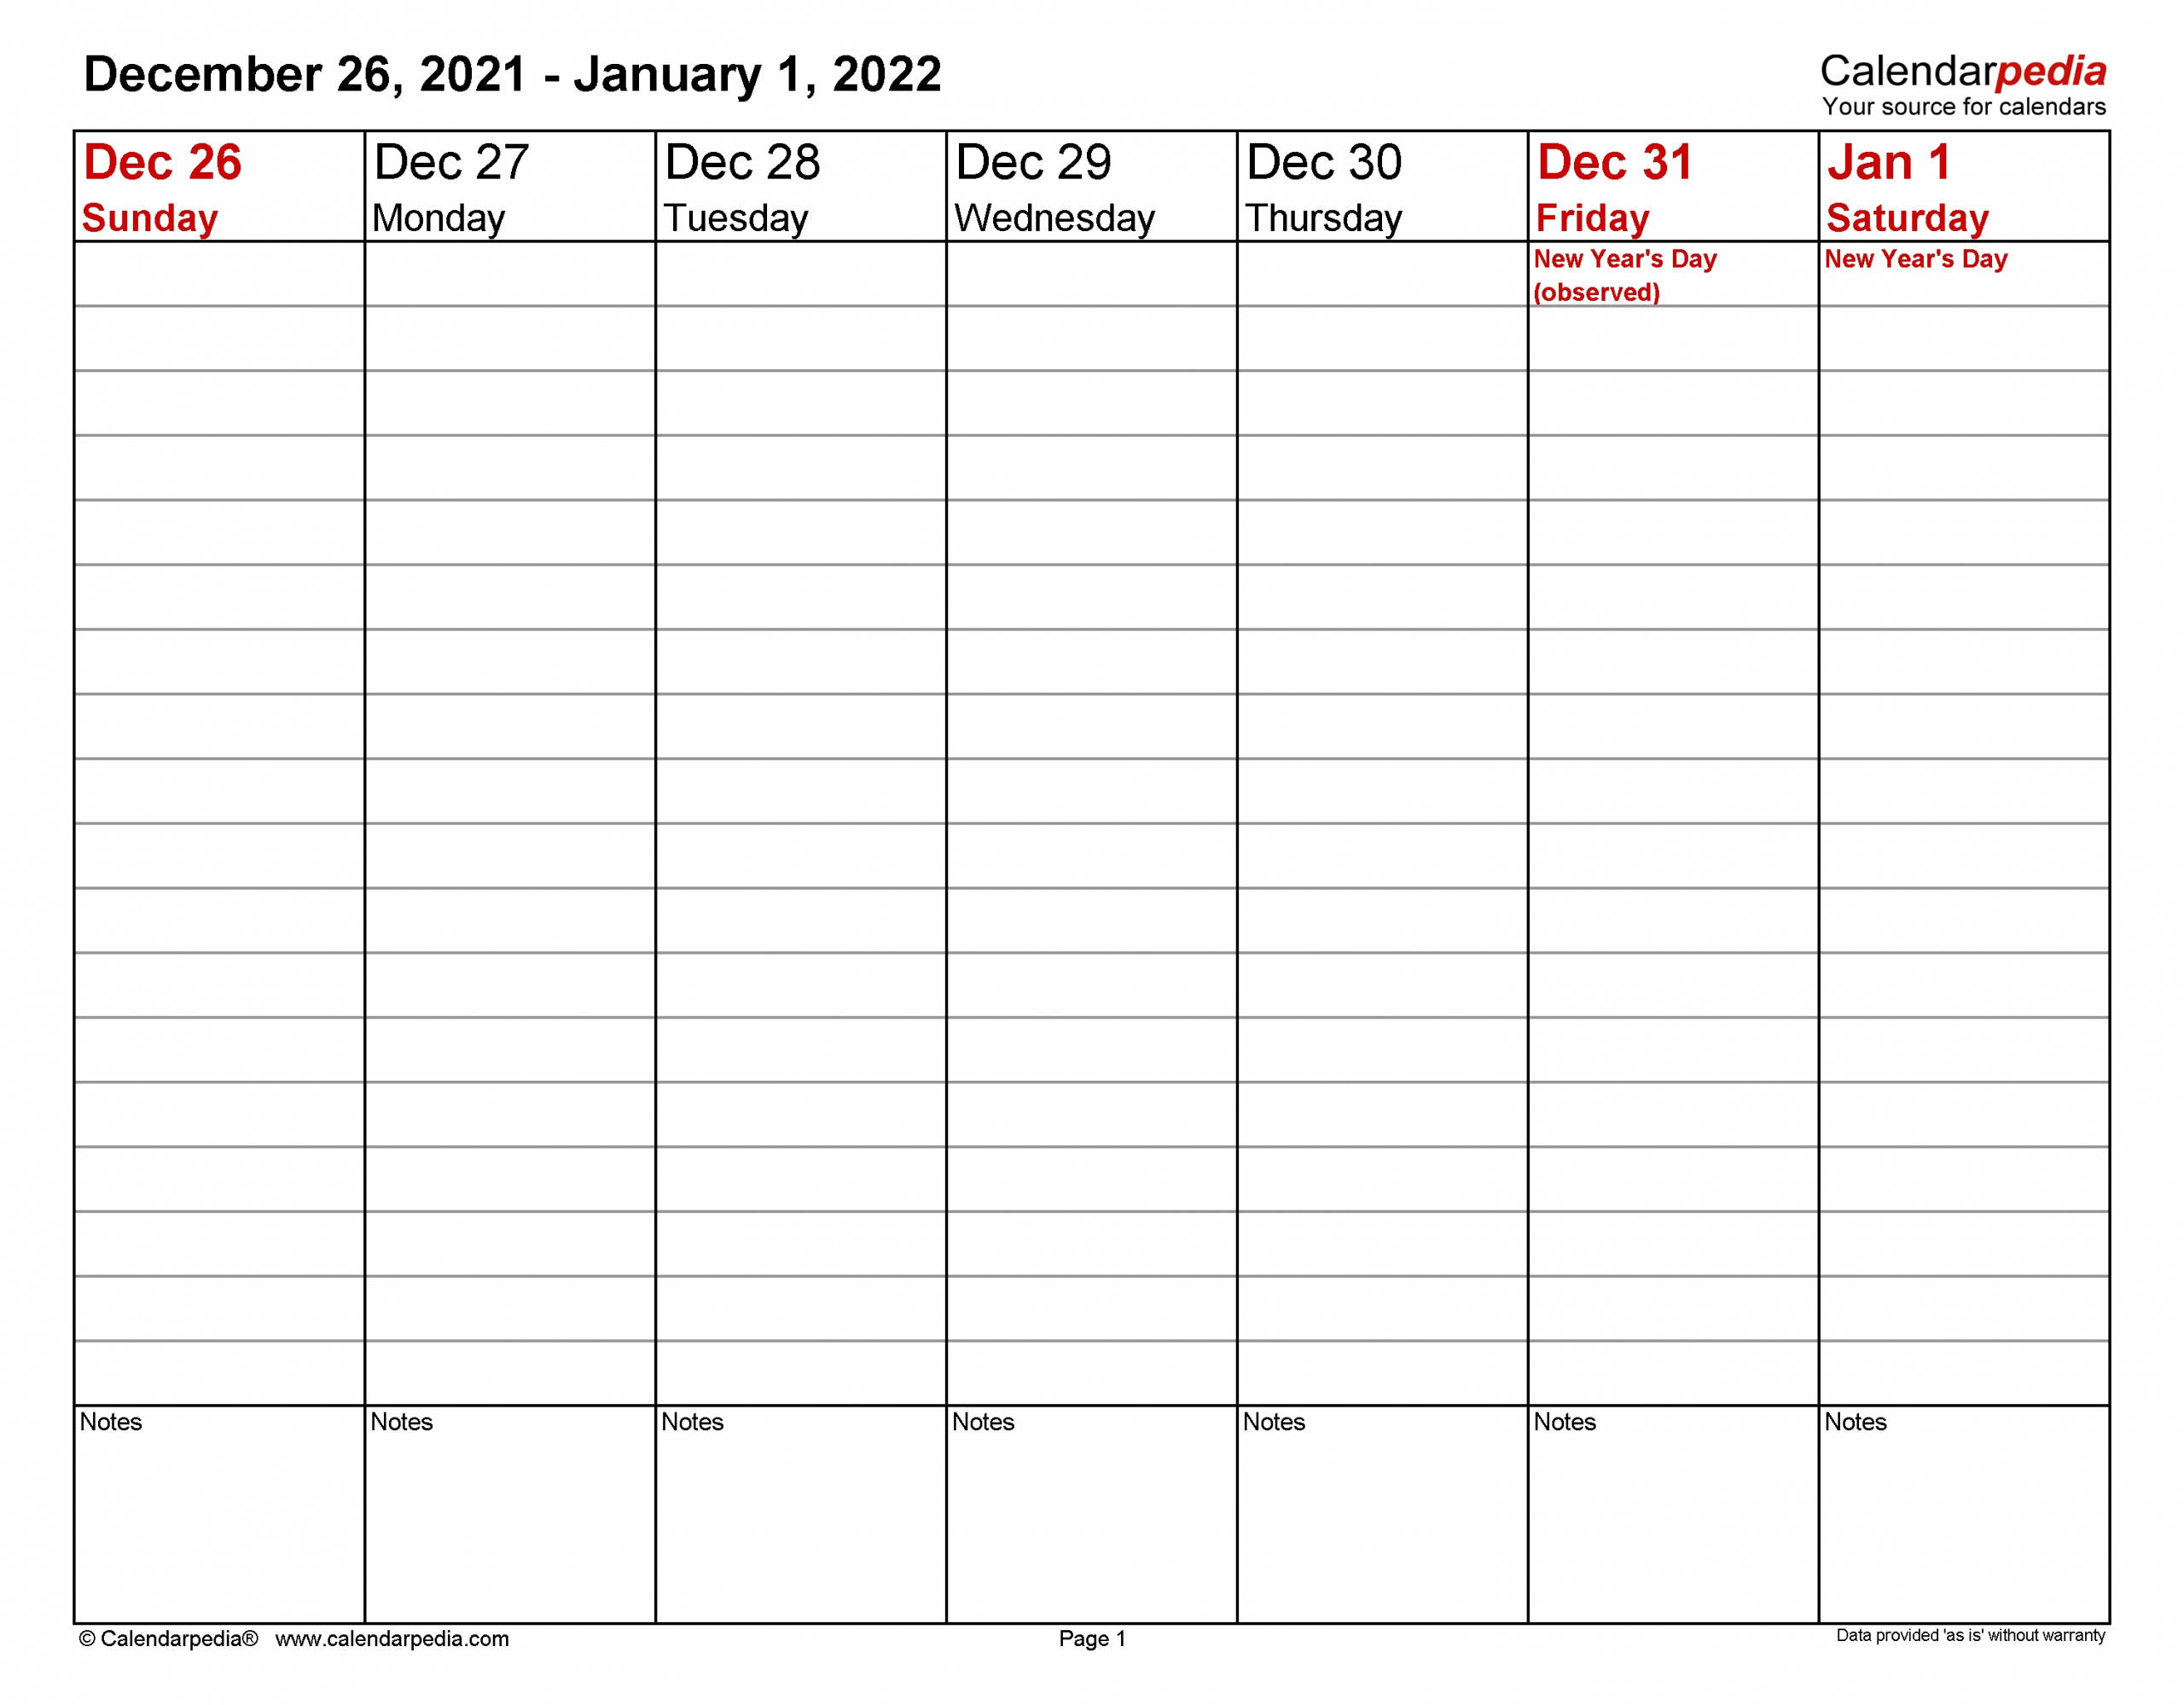 Weekly Calendars 2022 For Excel - 12 Free Printable Templates